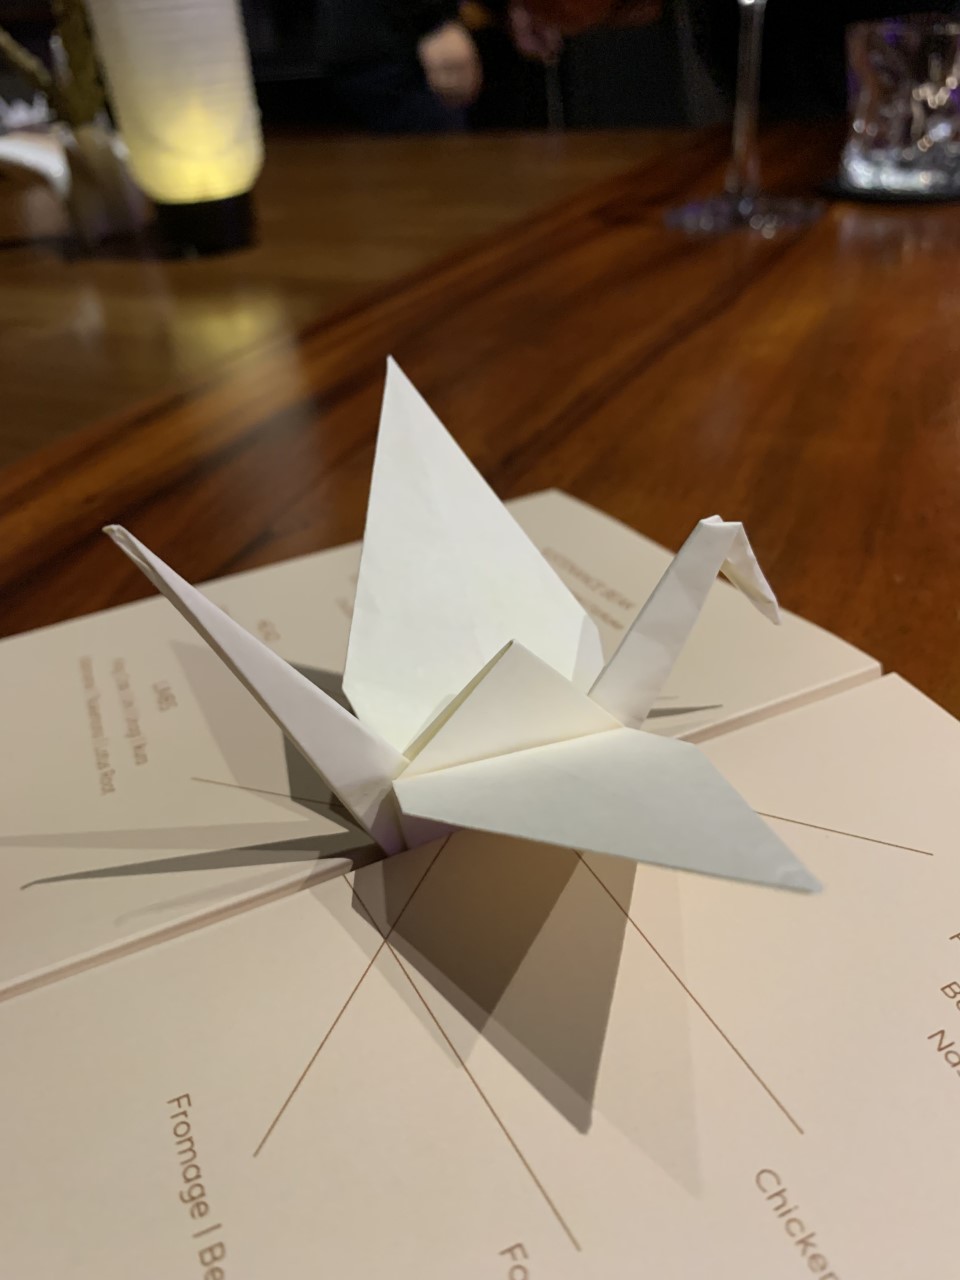 Modan's Second Menu Is Inspired by Origami